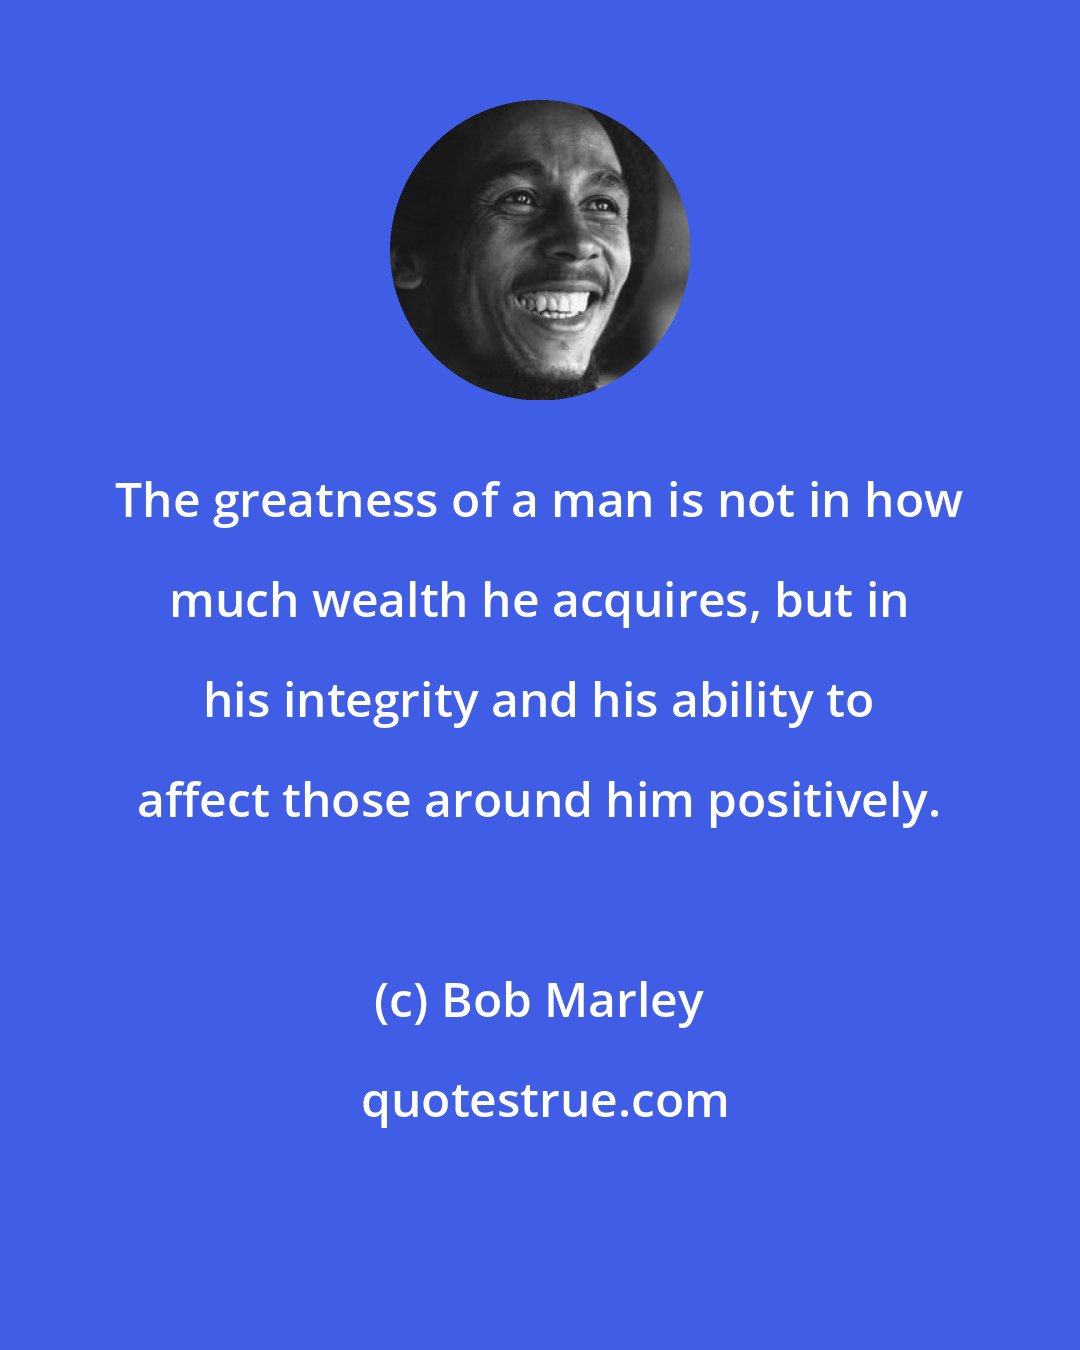 Bob Marley: The greatness of a man is not in how much wealth he acquires, but in his integrity and his ability to affect those around him positively.